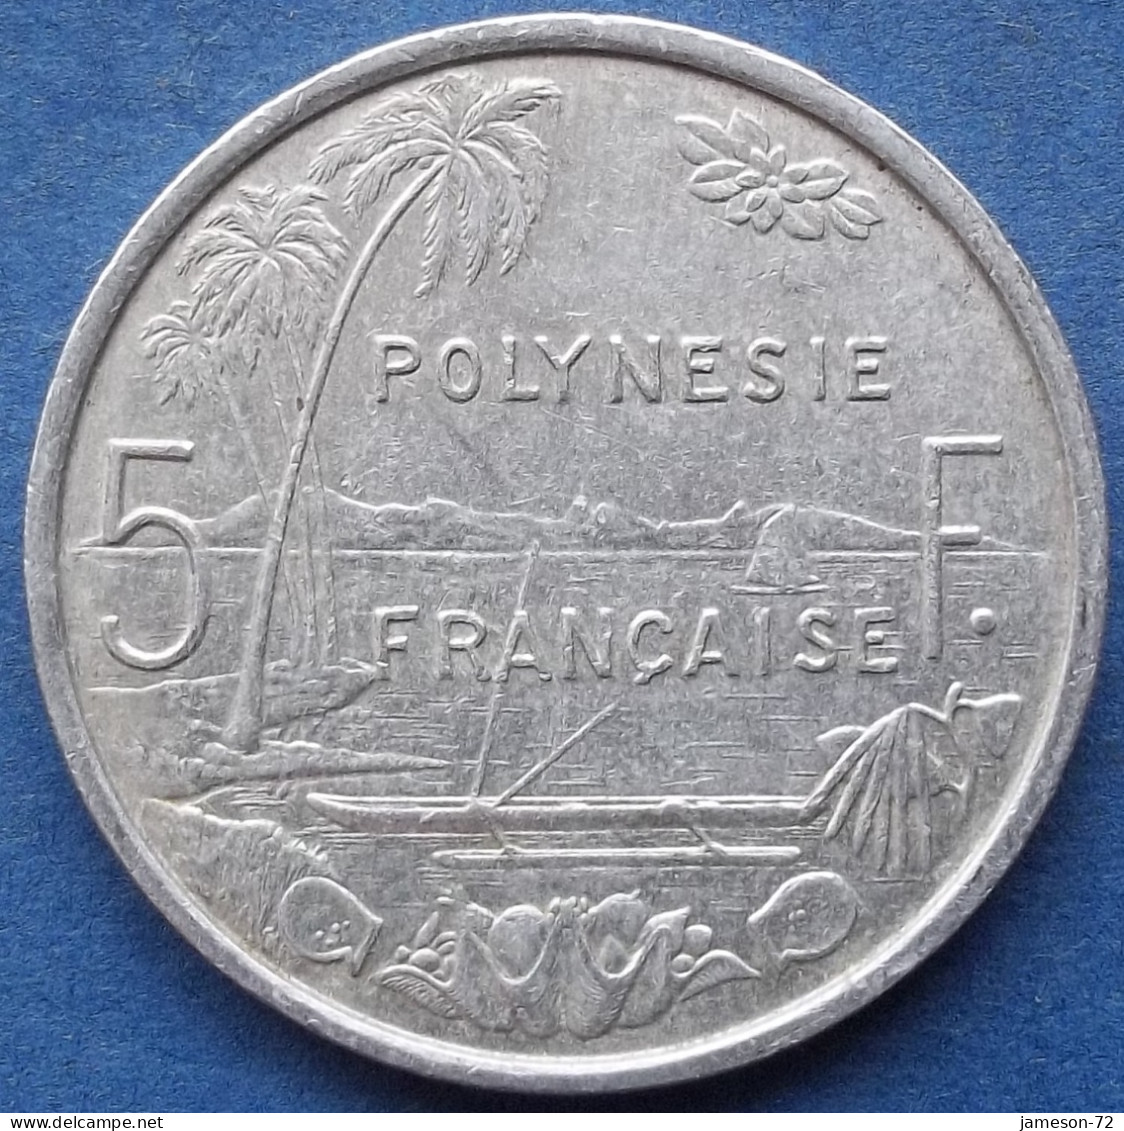 FRENCH POLYNESIA - 5 Francs 1997 KM# 12 French Overseas Territory - Edelweiss Coins - Polynésie Française